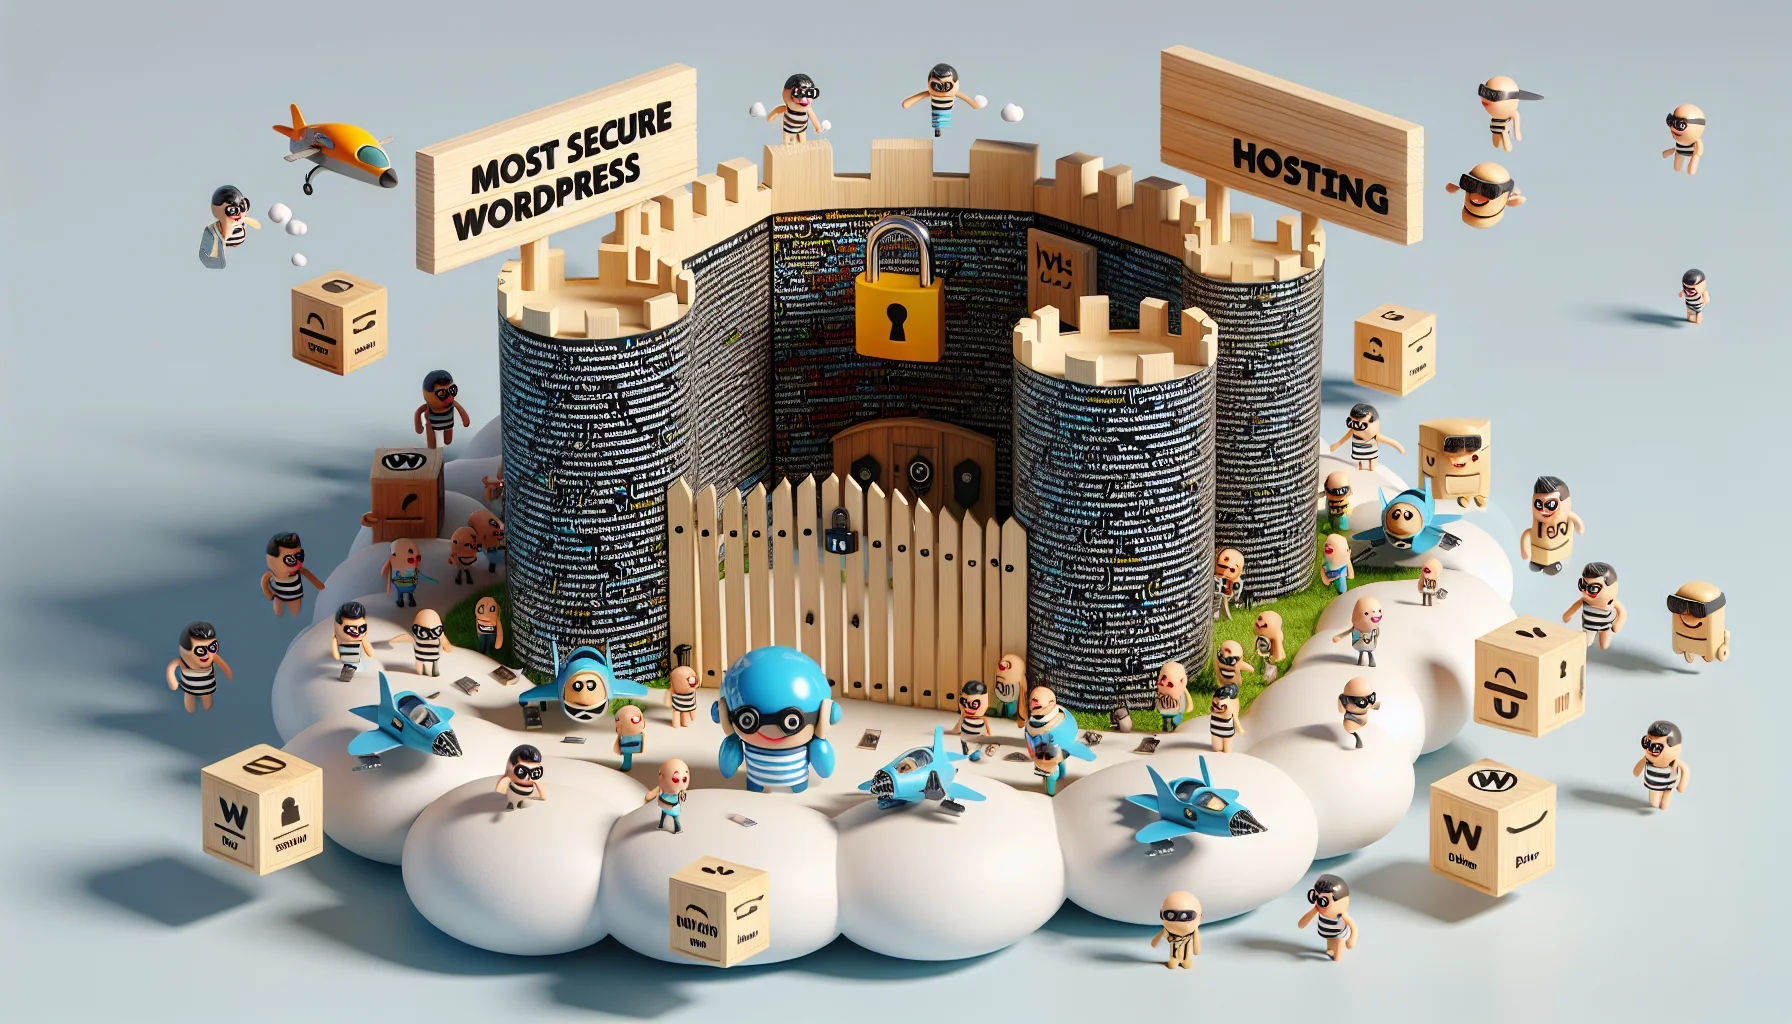 Imagine a humorous scene for most secure WordPress hosting. It's a secure fortress with thick walls made of coding scripts, standing tall on a cloud platform, symbolizing an online server. The gates are sturdy padlocks, representing robust security measures. Floating around, there are multiple miniature funny characters representing different web-hosting features, like speedy turbo jets symbolizing fast load times, and mini robots performing maintenance work. Additionally, there are huddled together smiling figures, depicting a support team ready to help. This scene should create an enticing and engaging view of web hosting.